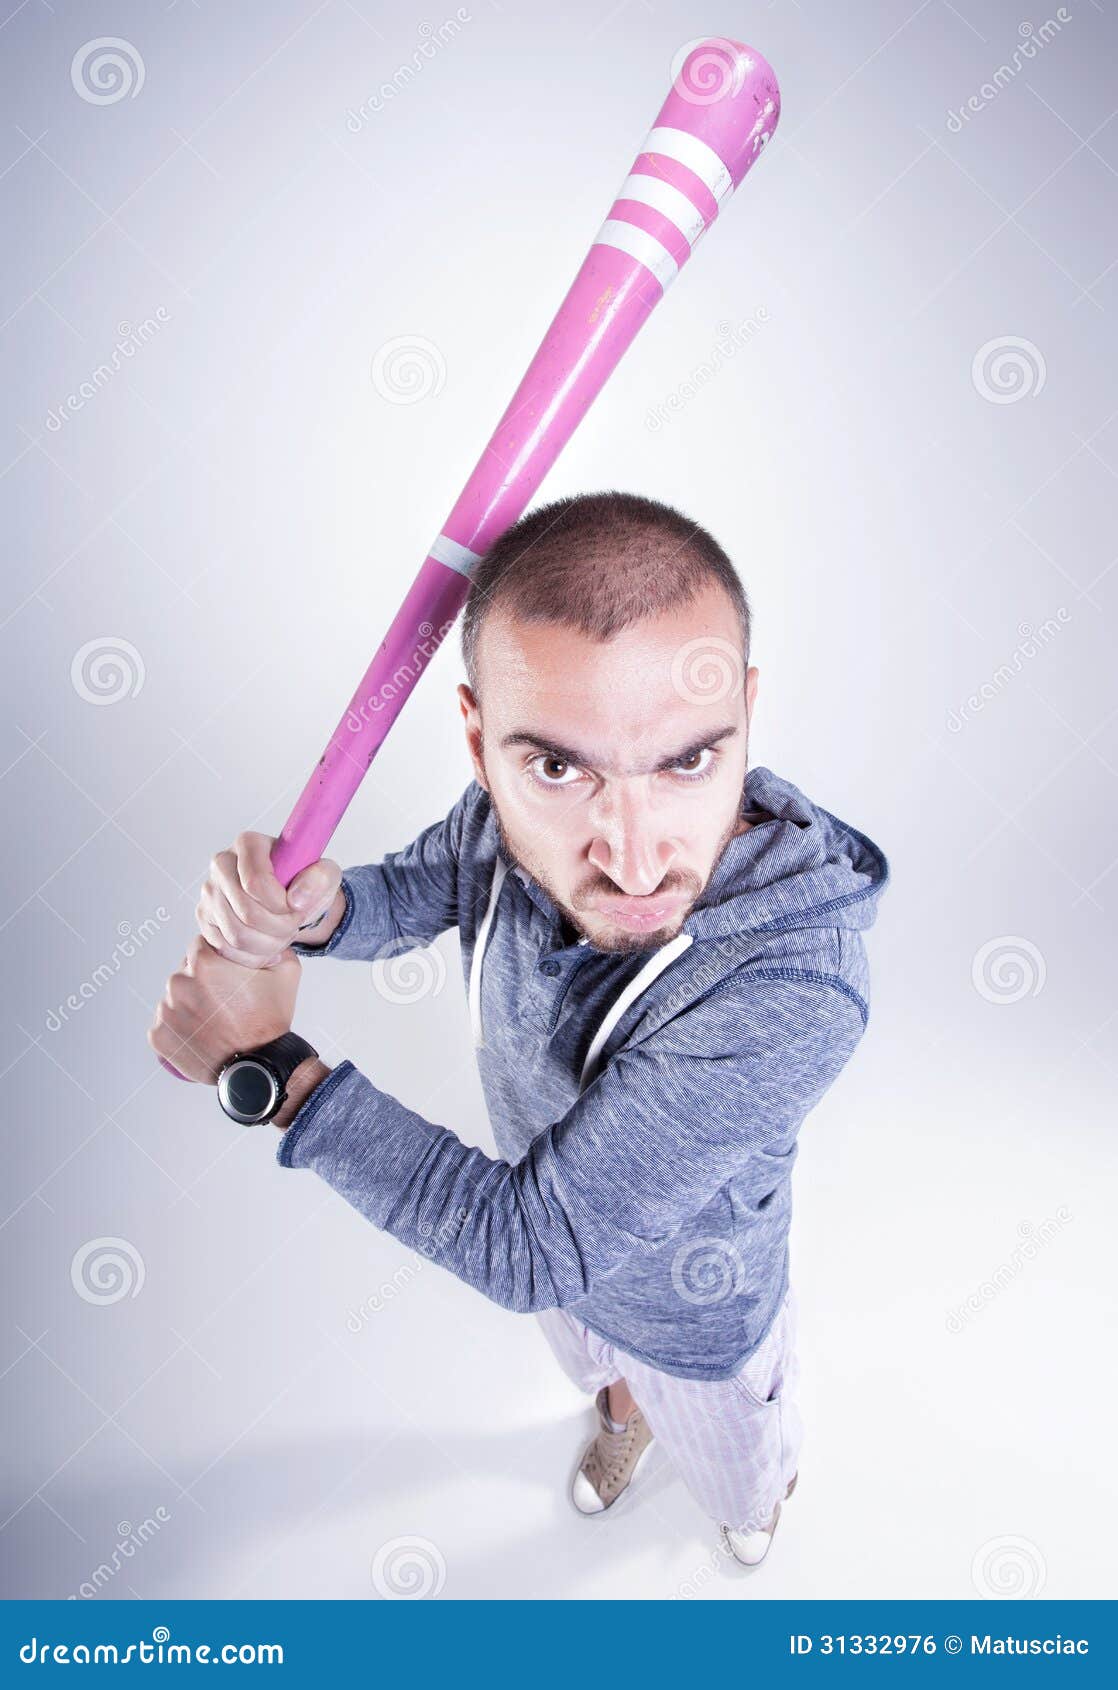 funny hooligan with a pink baseball bat looking angry in the studio